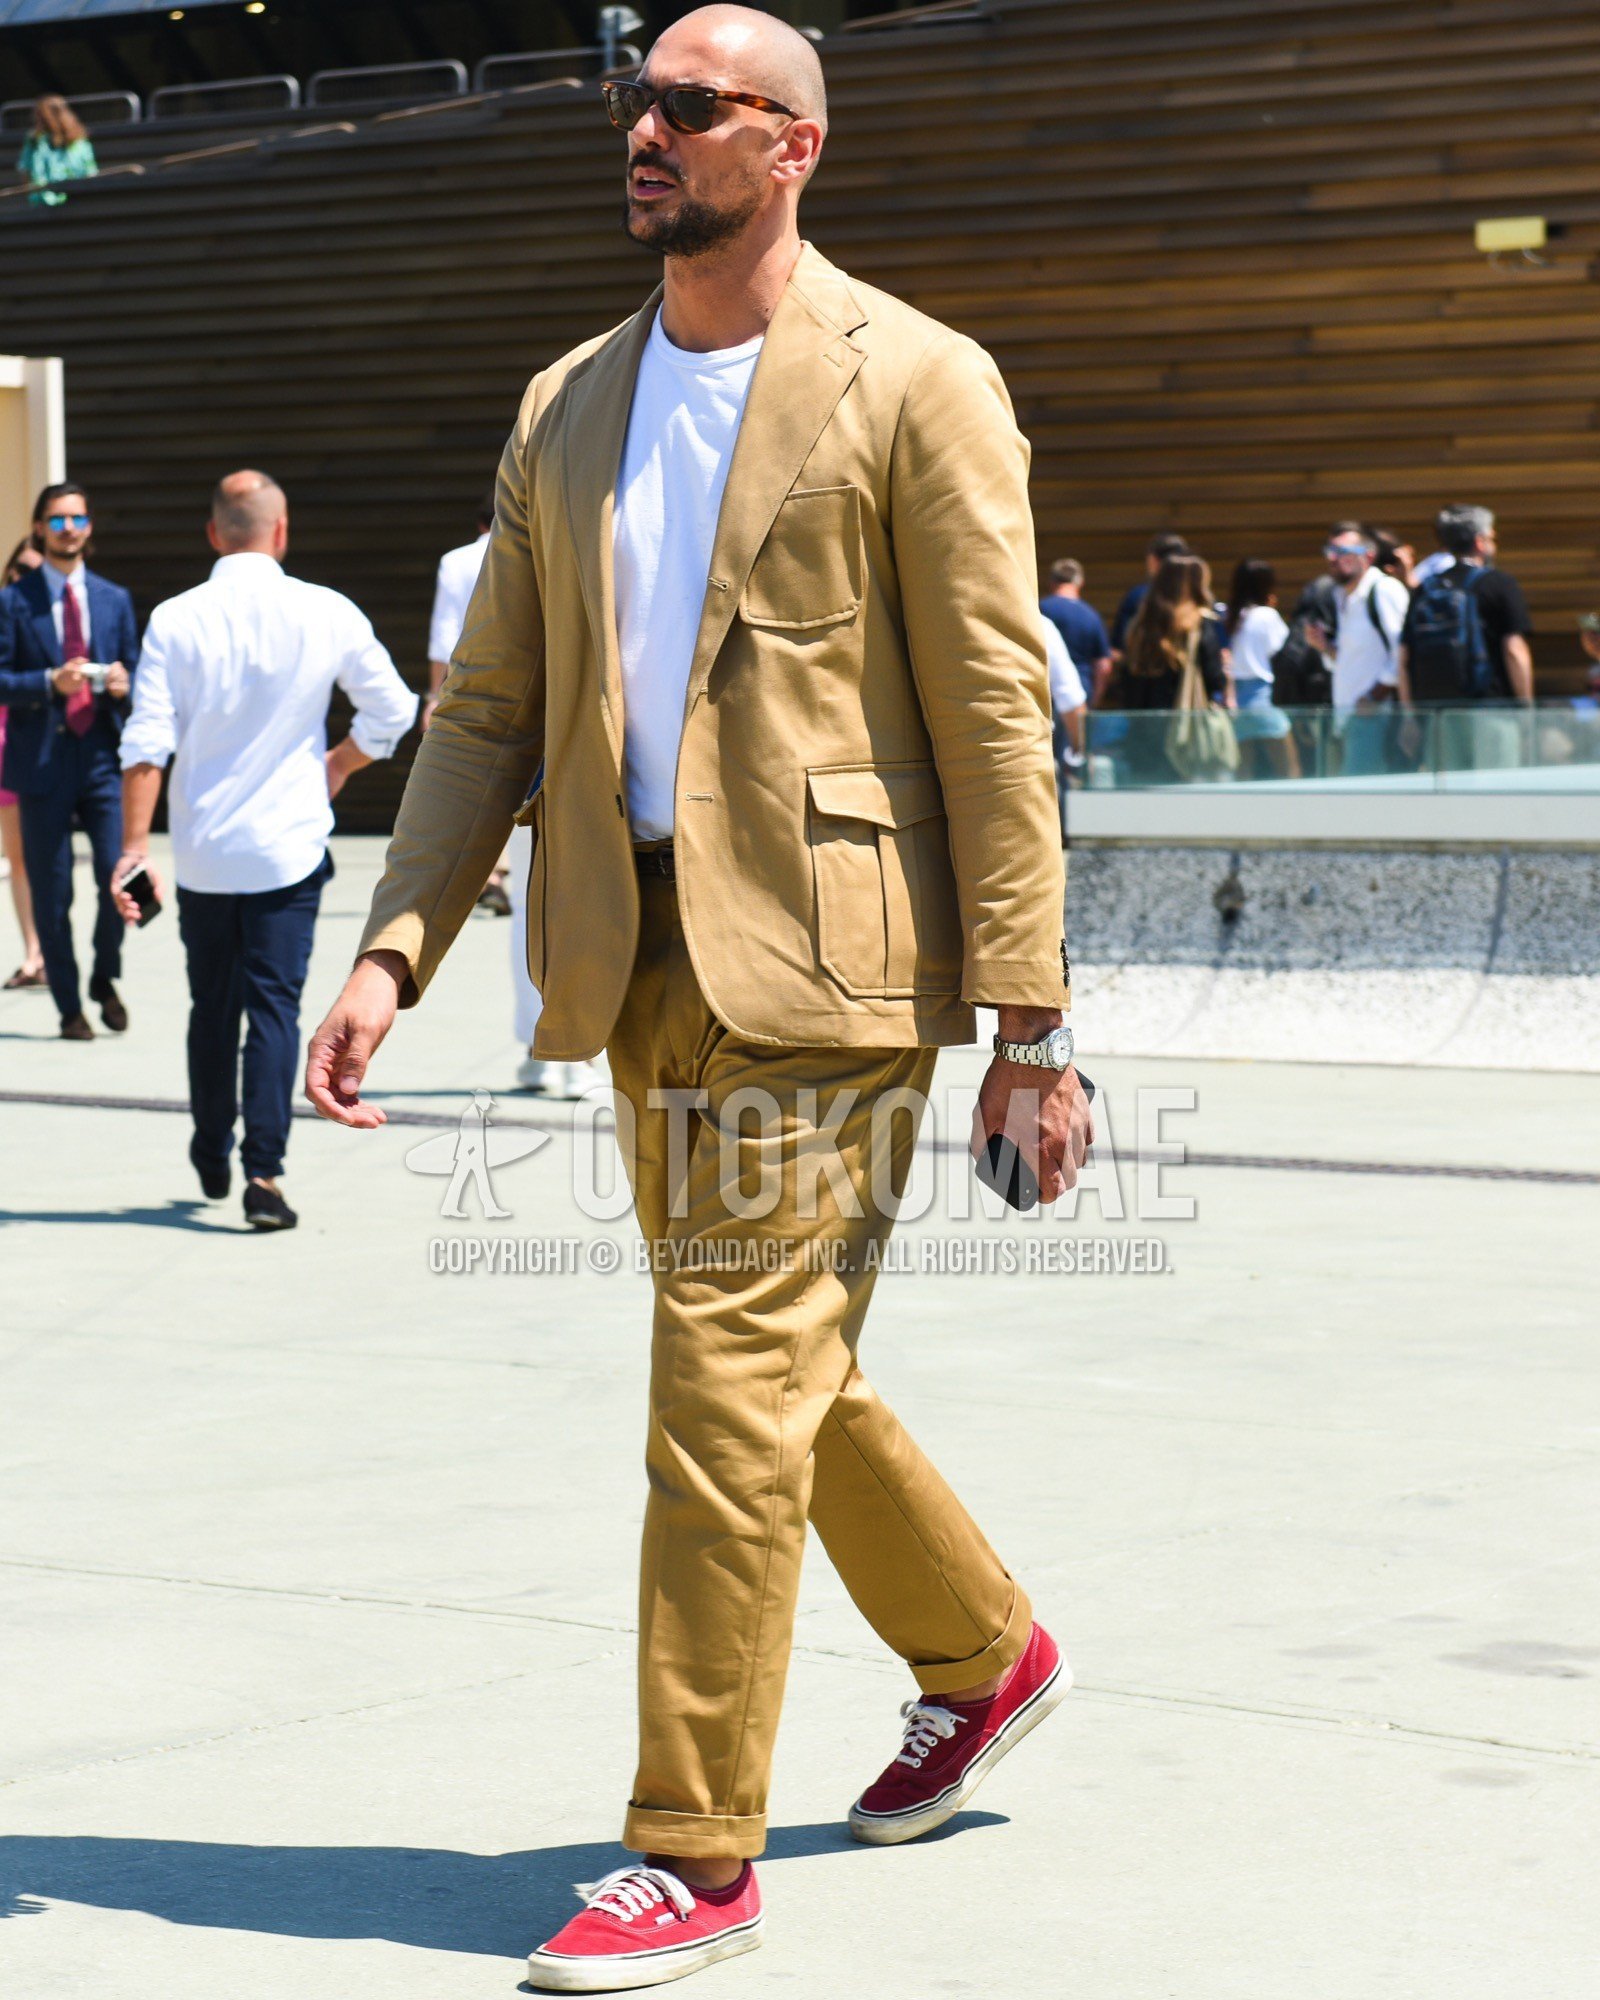 Men's spring summer outfit with brown tortoiseshell sunglasses, white plain t-shirt, brown plain leather belt, red high-cut sneakers, beige plain casual setup.